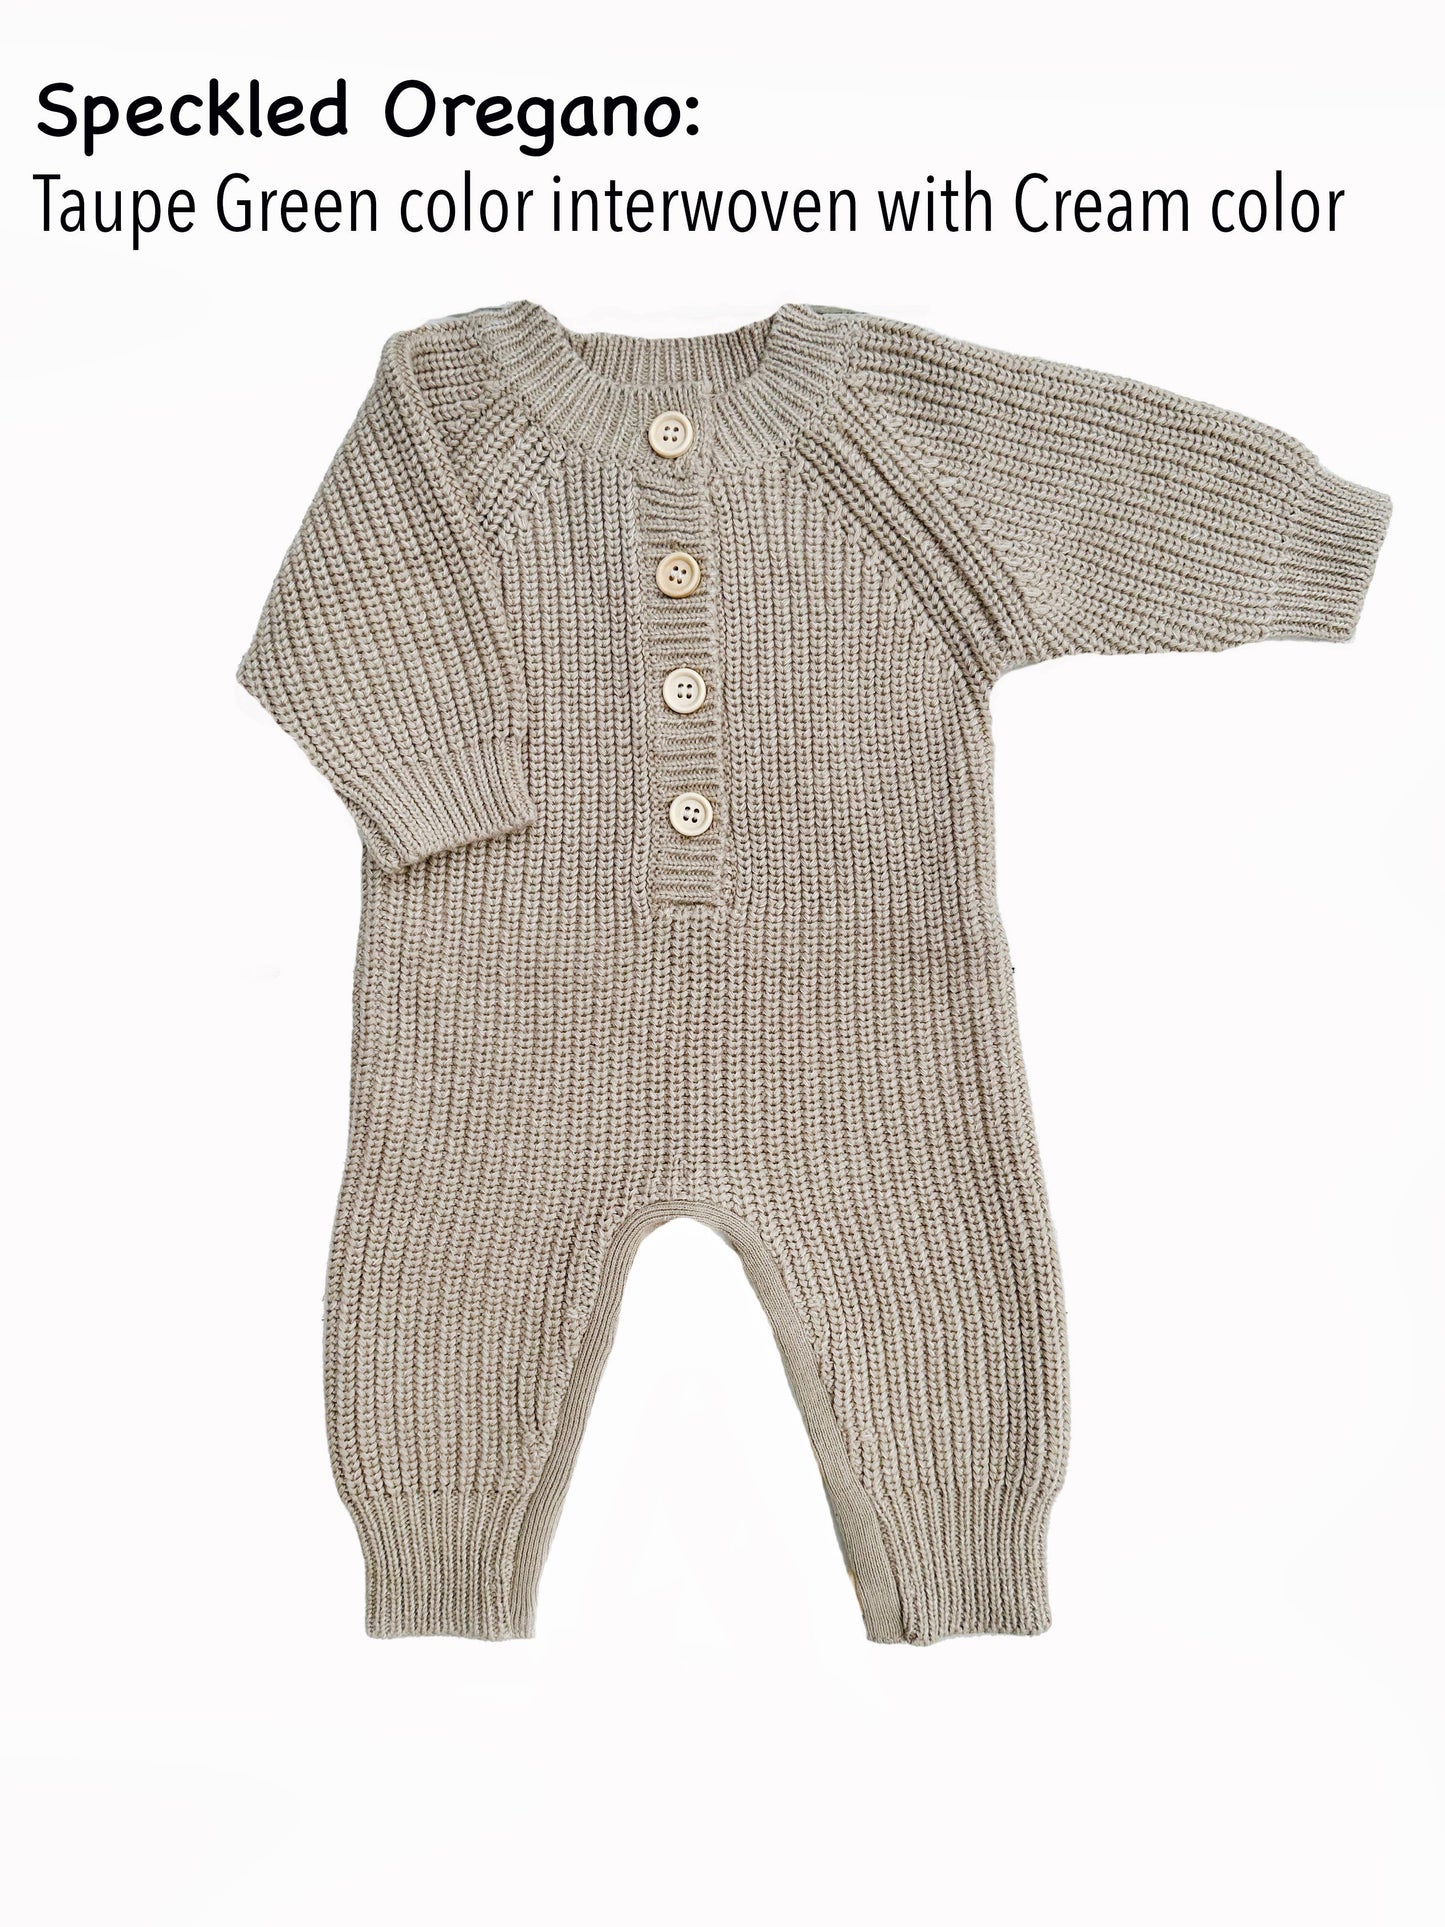 Baby Knit Romper Button Jumpsuit / Speckled Oregano